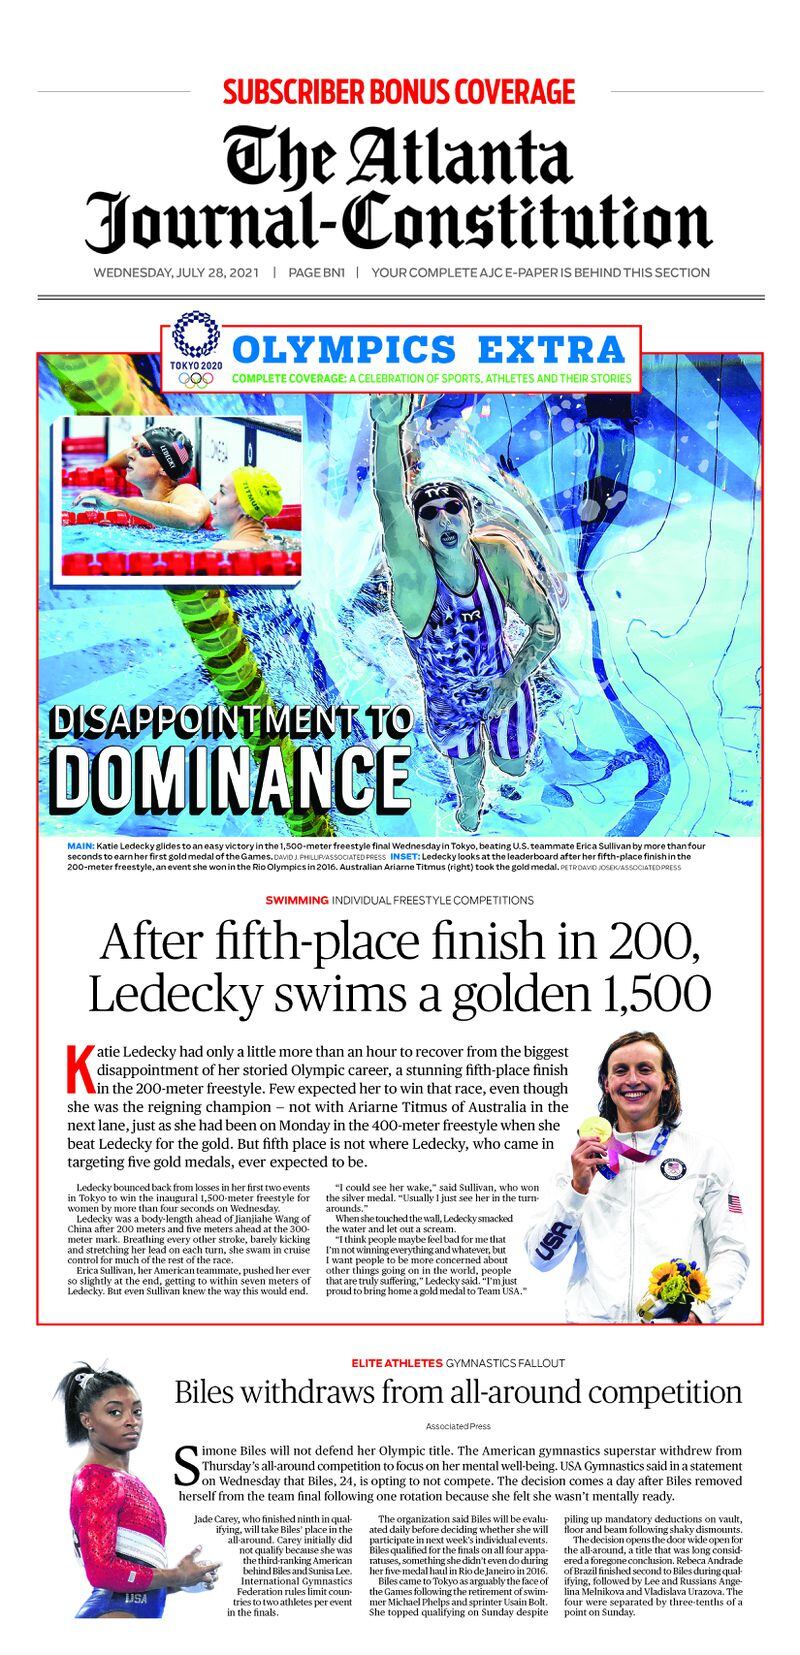 Tokyo Olympic Extra in the AJC ePaper Wednesday July 28 2021 (AJC ePaper, The Atlanta Journal-Constitution)